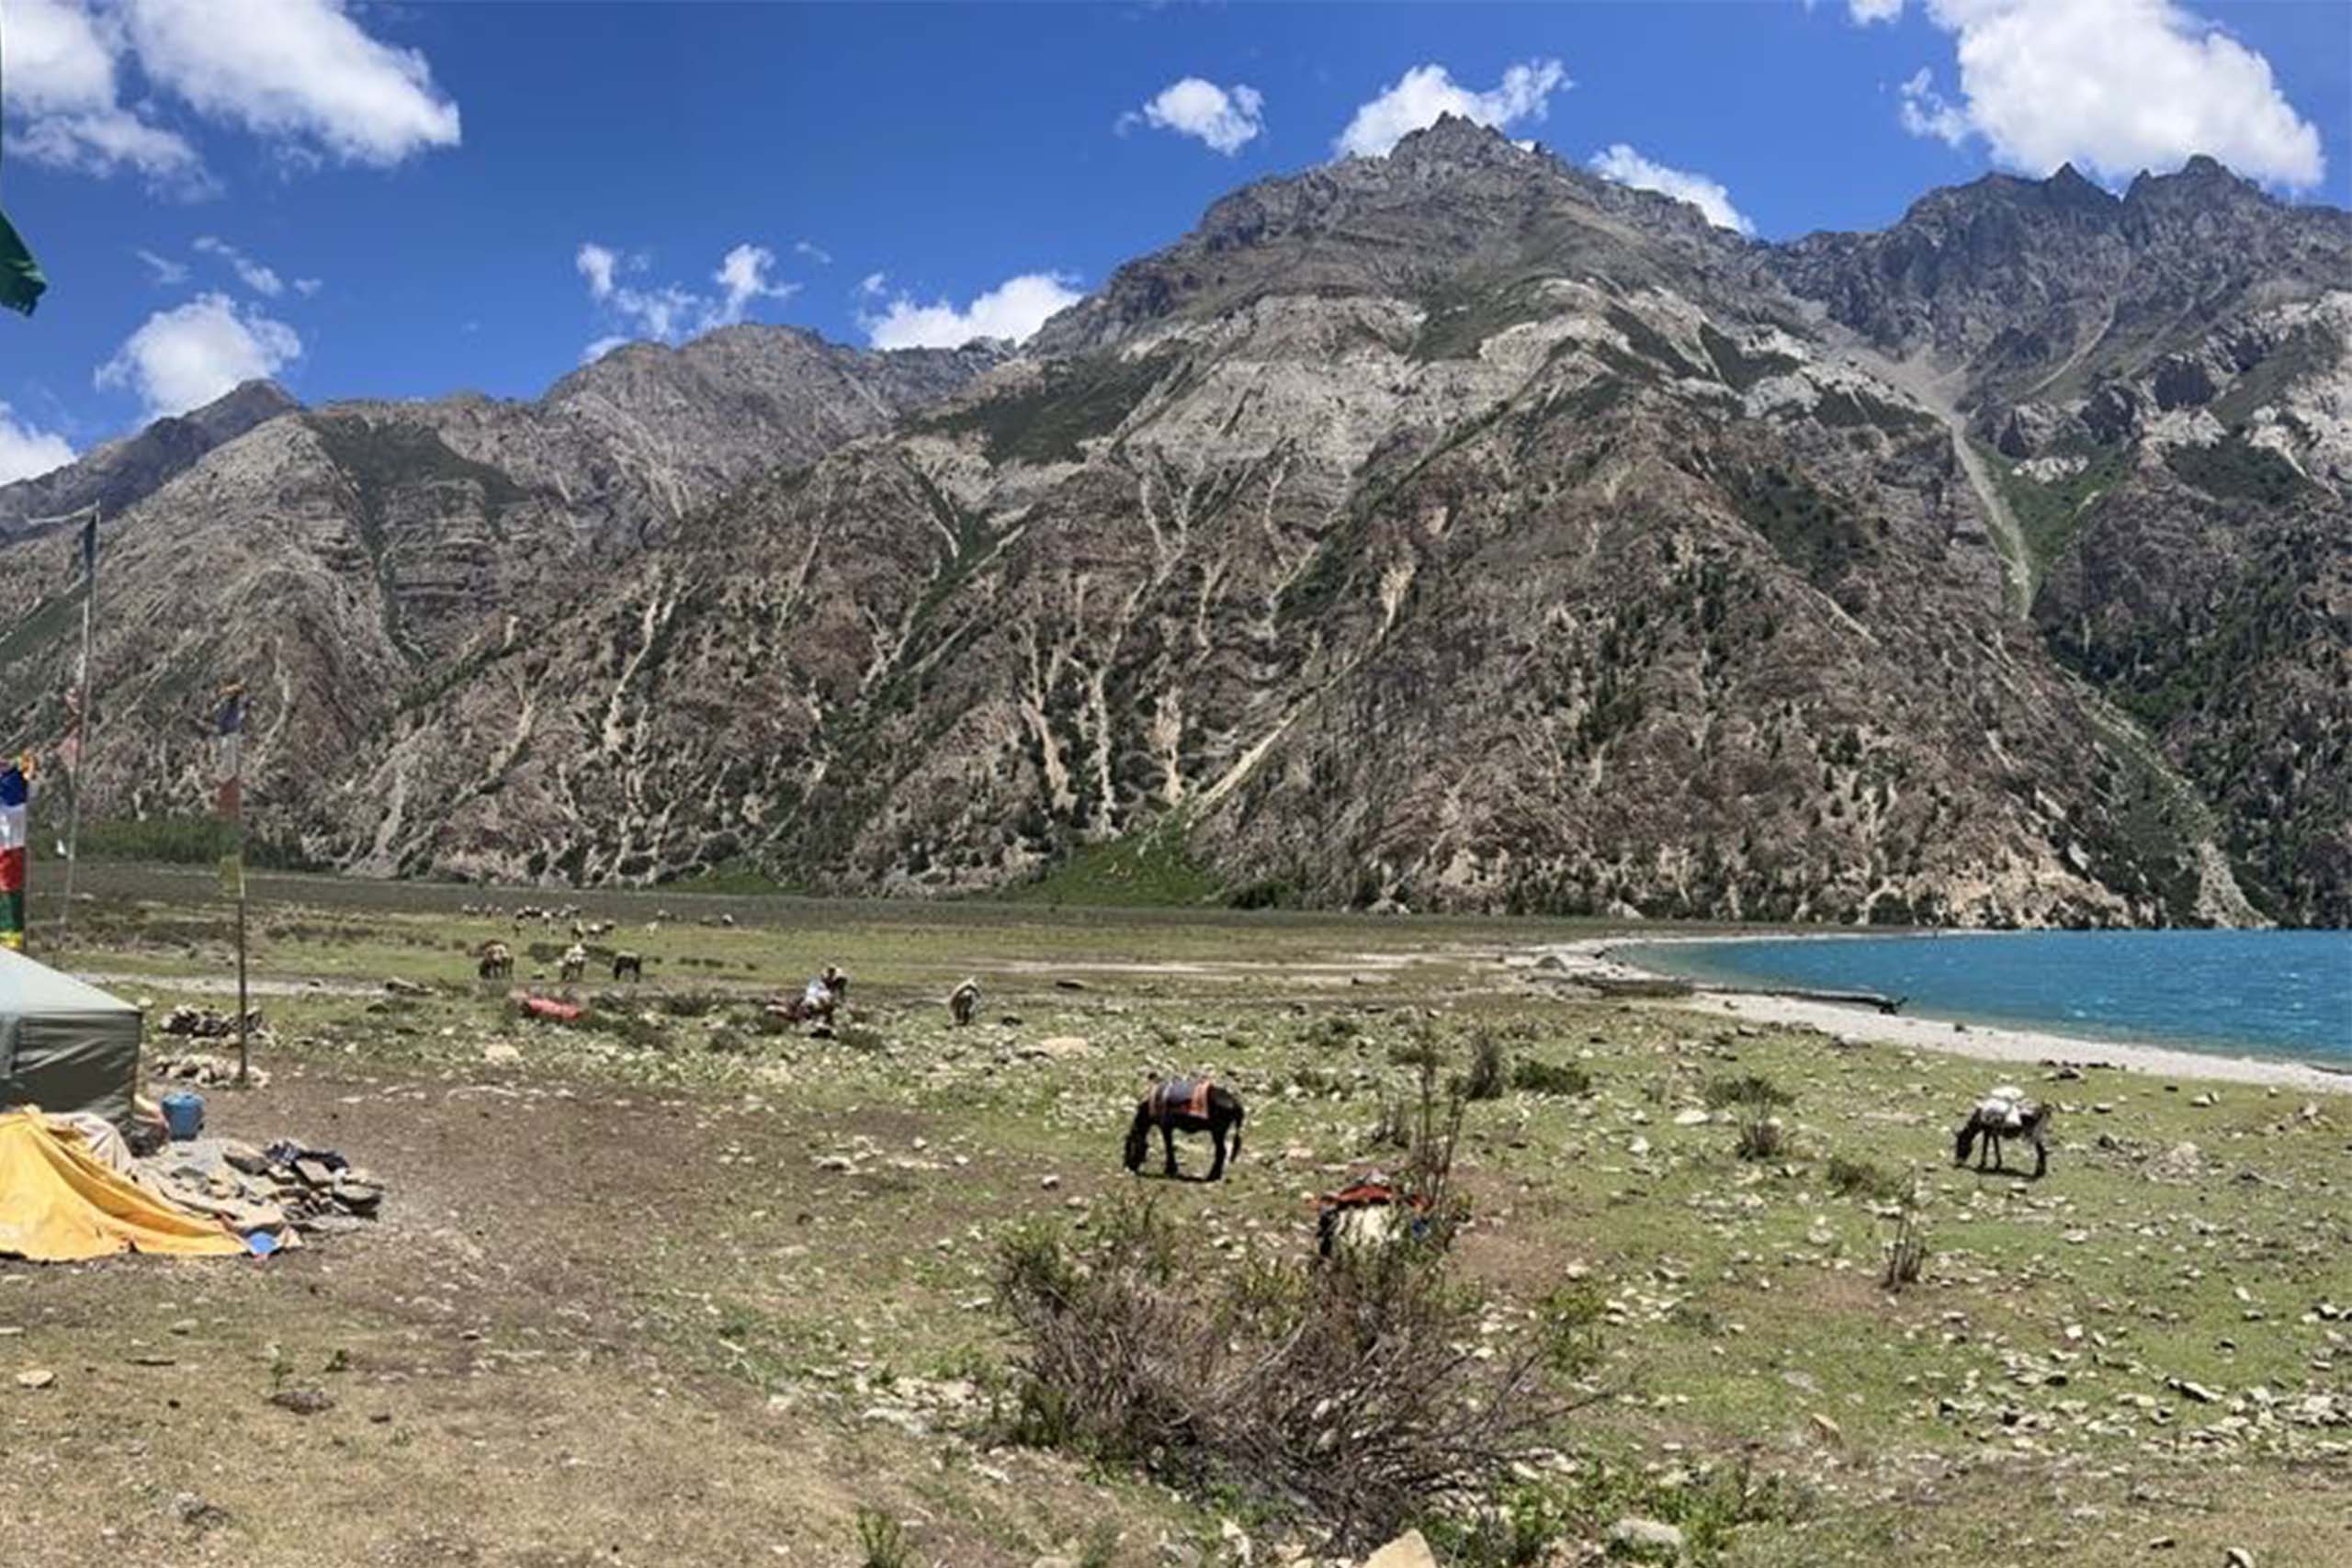 Horses graze in a remote section of the Himalayas – the horses were a vital part of the team, helping to carry the travelers over steep, narrow, sandy mountain passes.